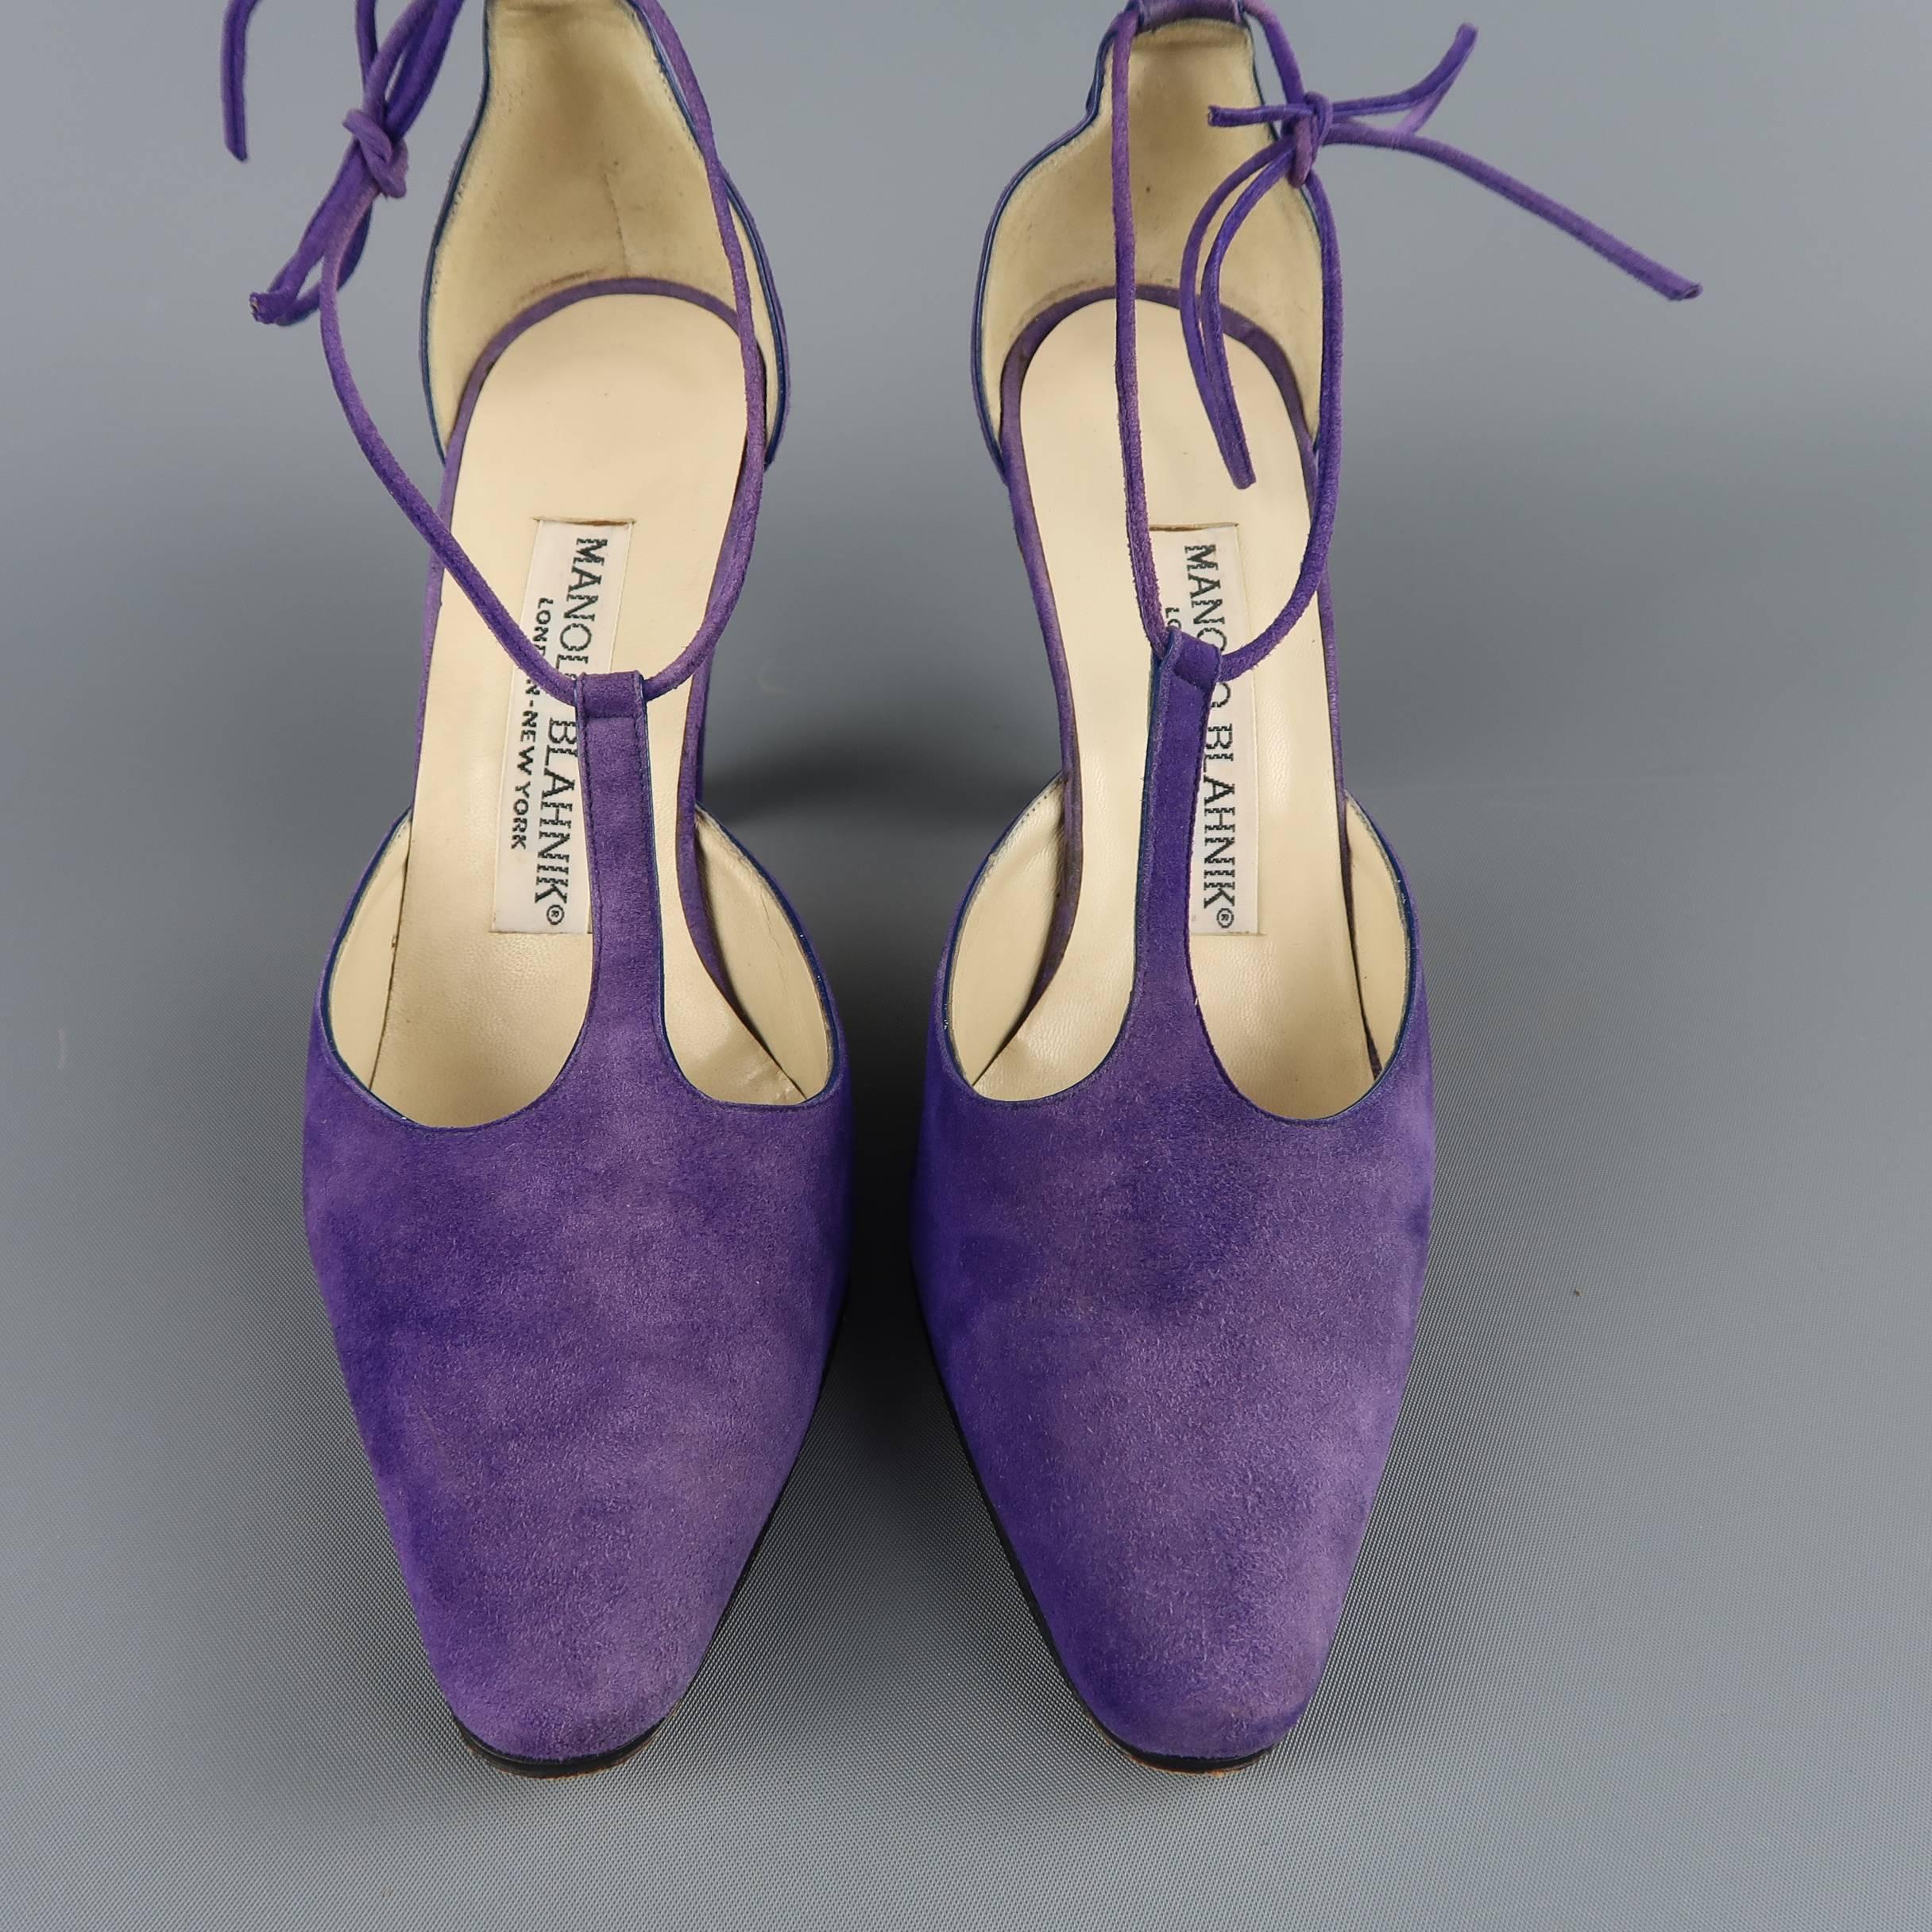 Vintage MANOLO BLAHNIK pumps come in purple suede with a pointed toe, T strap covered heel, and tied ankle. Wear throughout. Made in Italy.
 
Fair Pre-Owned Condition.
Marked: IT 36
 
Measurements:
 
Heel: 3.25 in.
